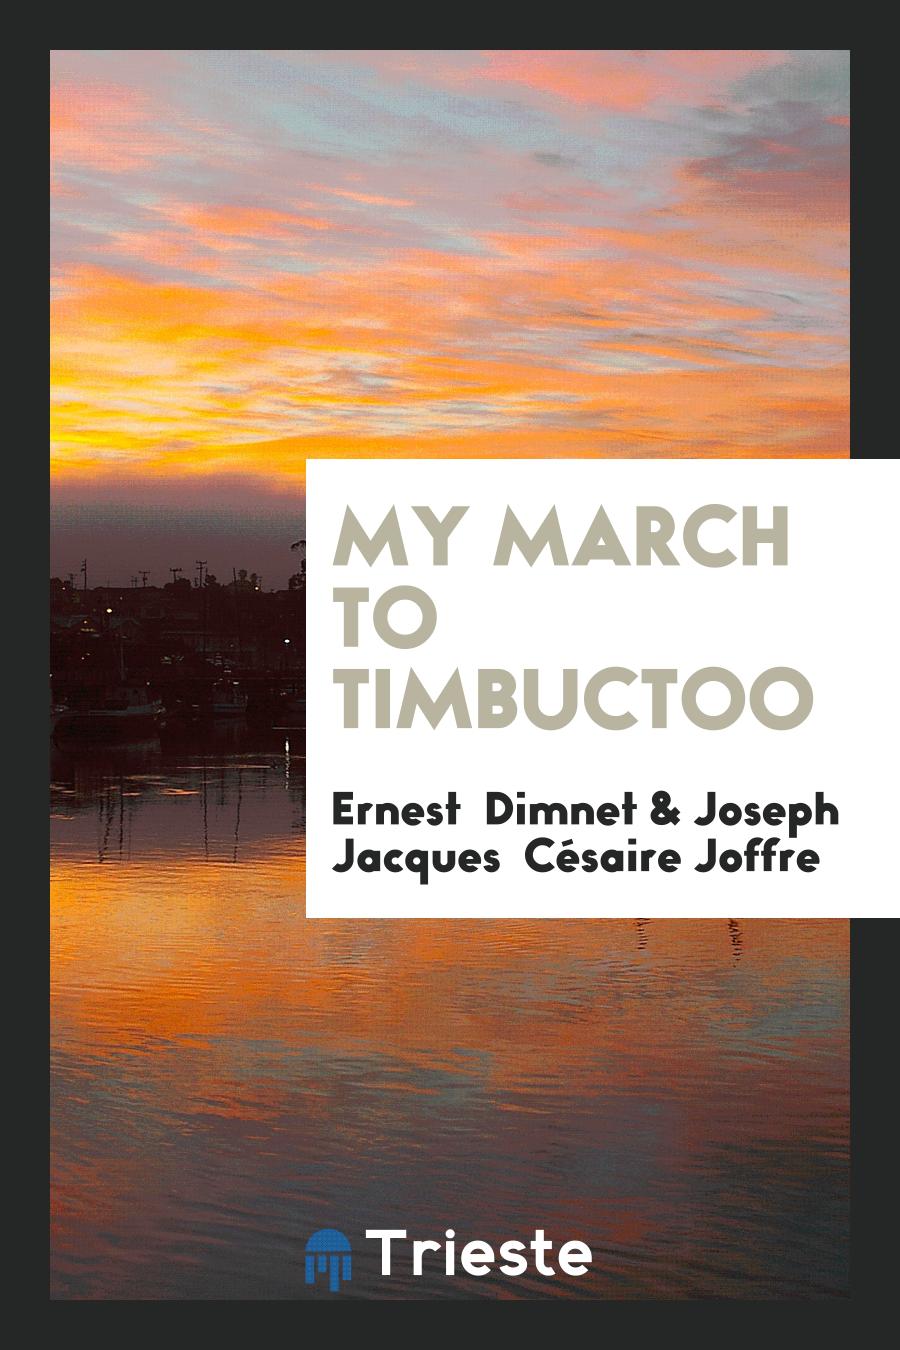 My March to Timbuctoo